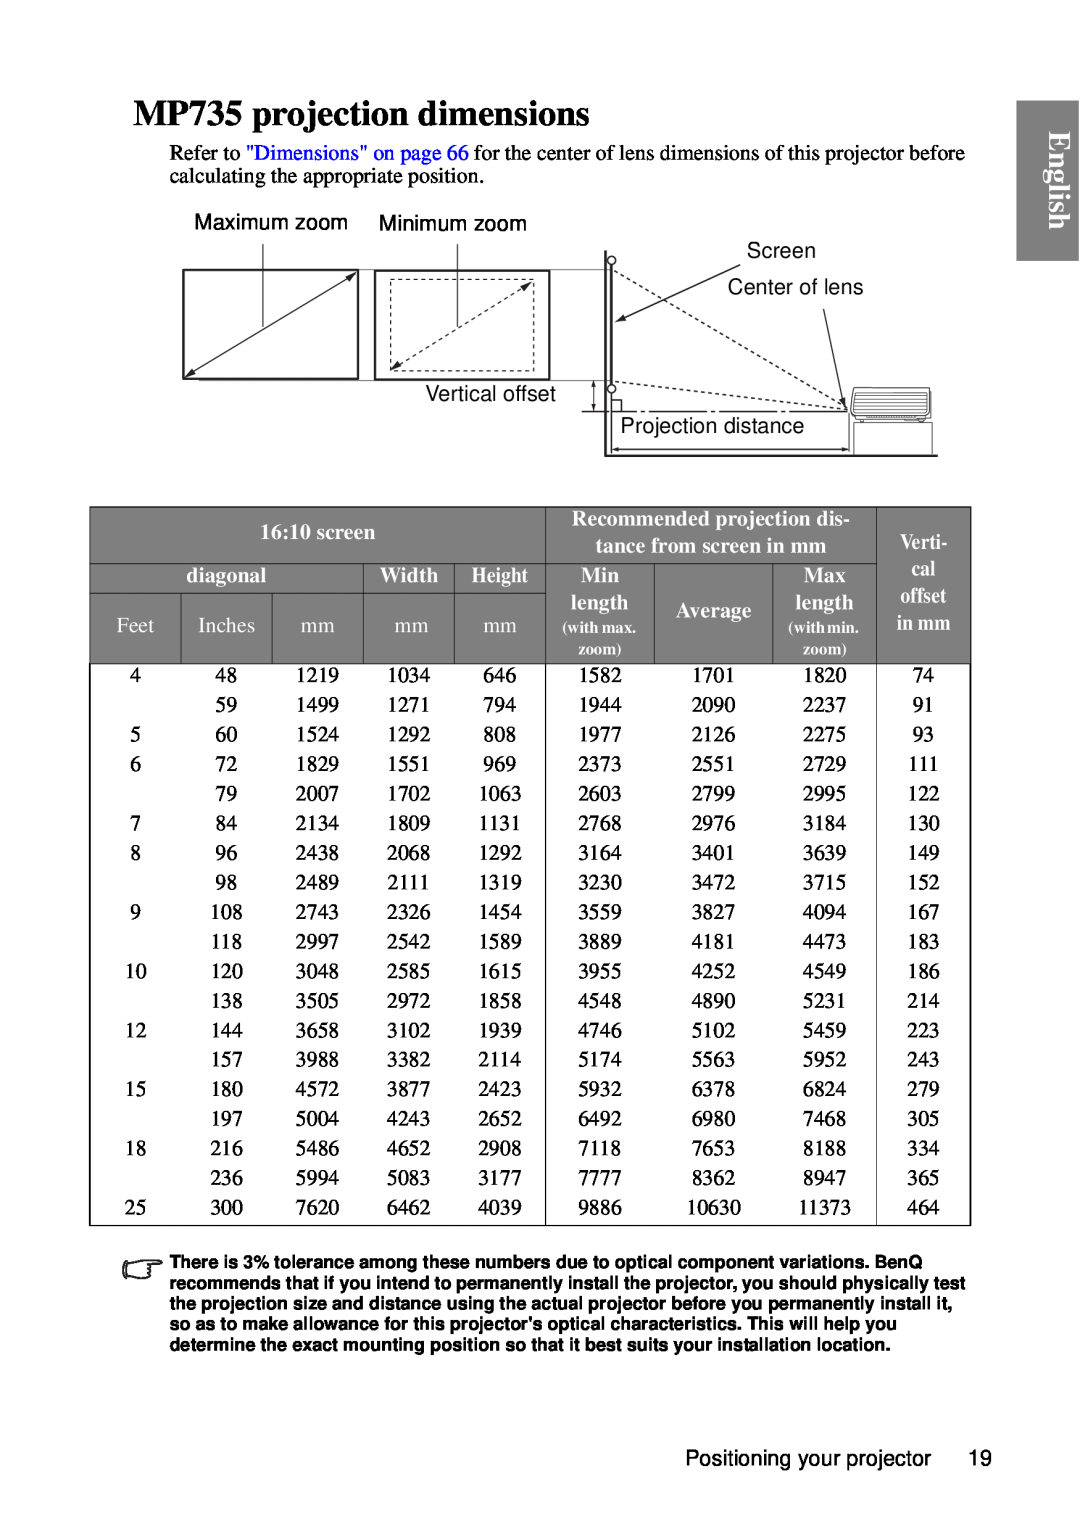 BenQ MP727 user manual MP735 projection dimensions, English, Width, Feet 